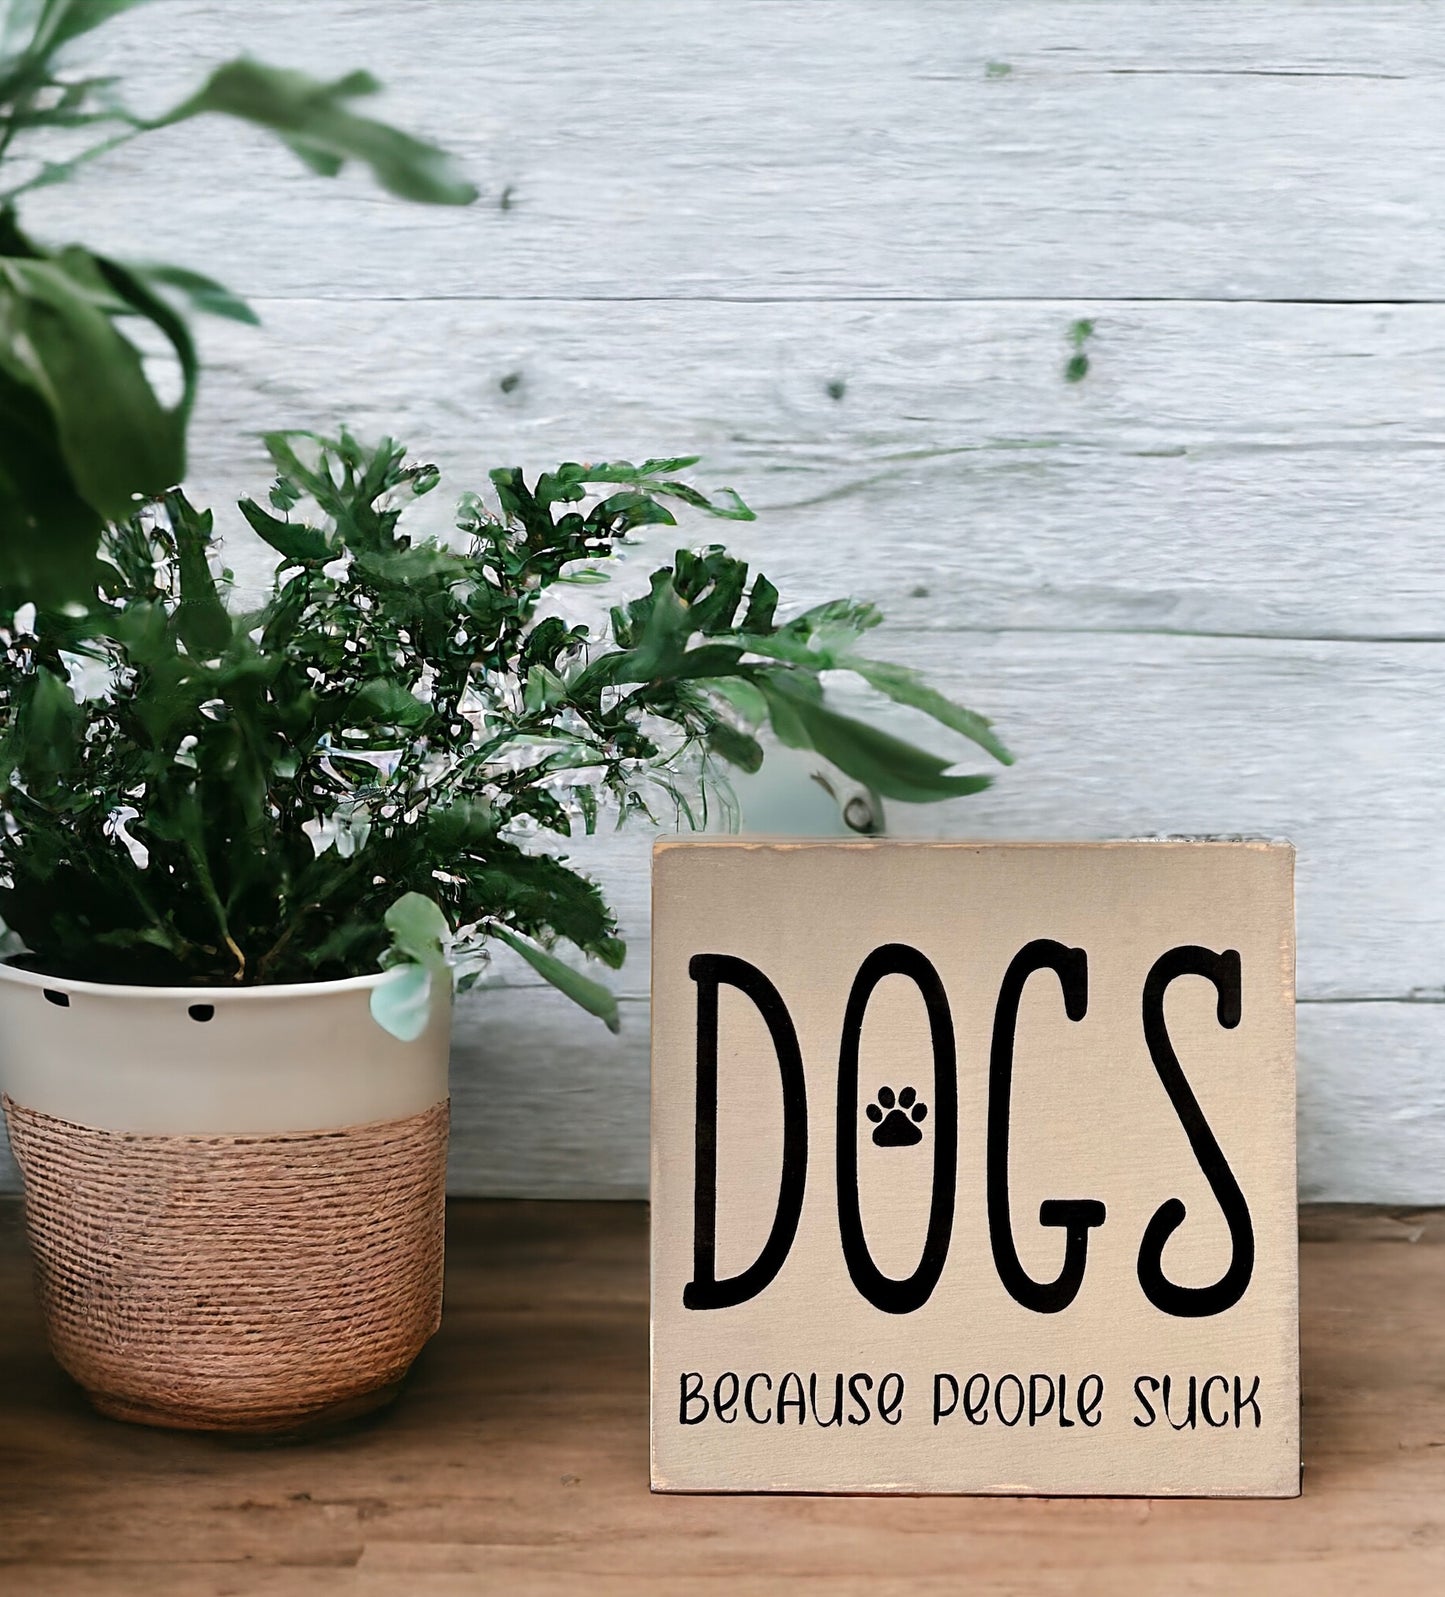 "Dogs" Wood sign